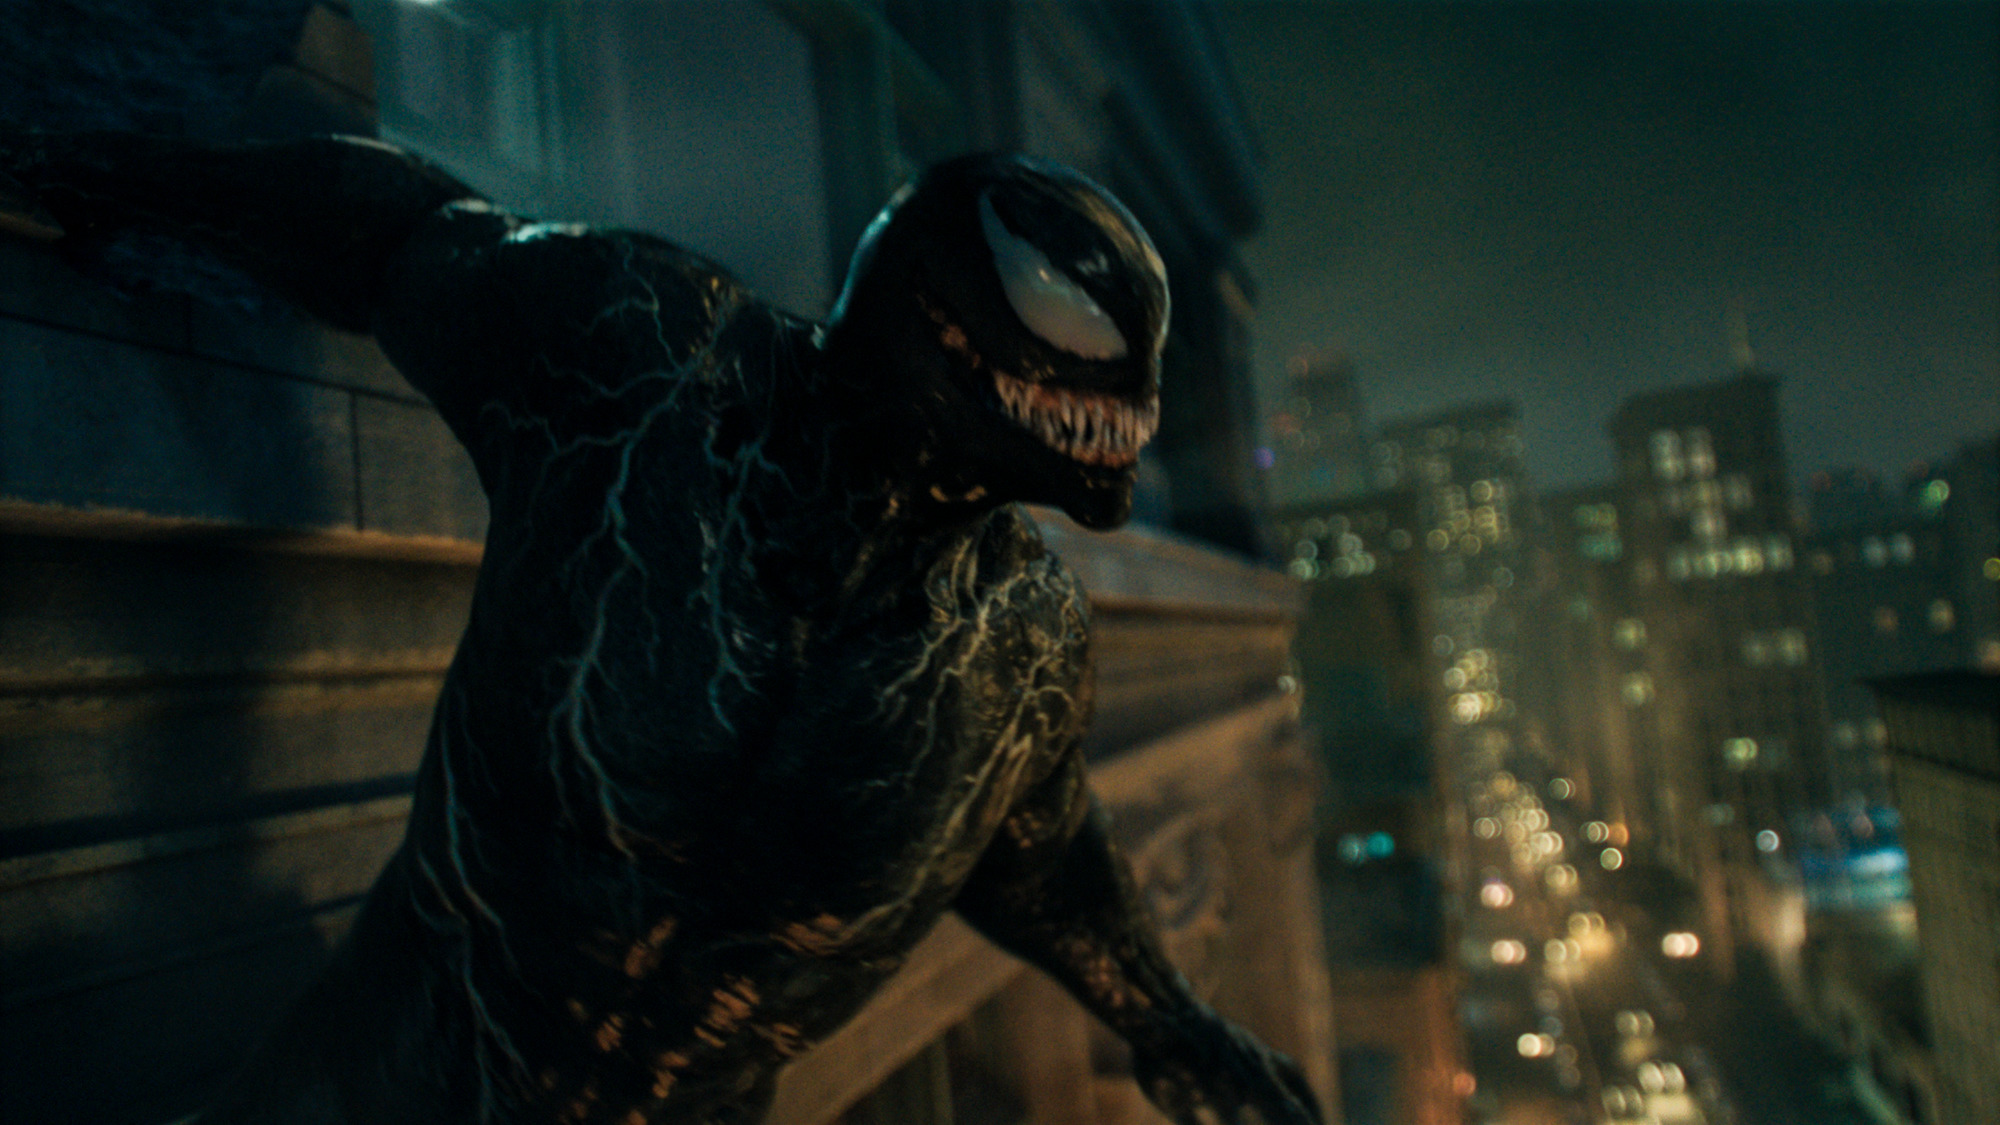 Venom perched on the side of a tall building at night with a skyline and lights below him.